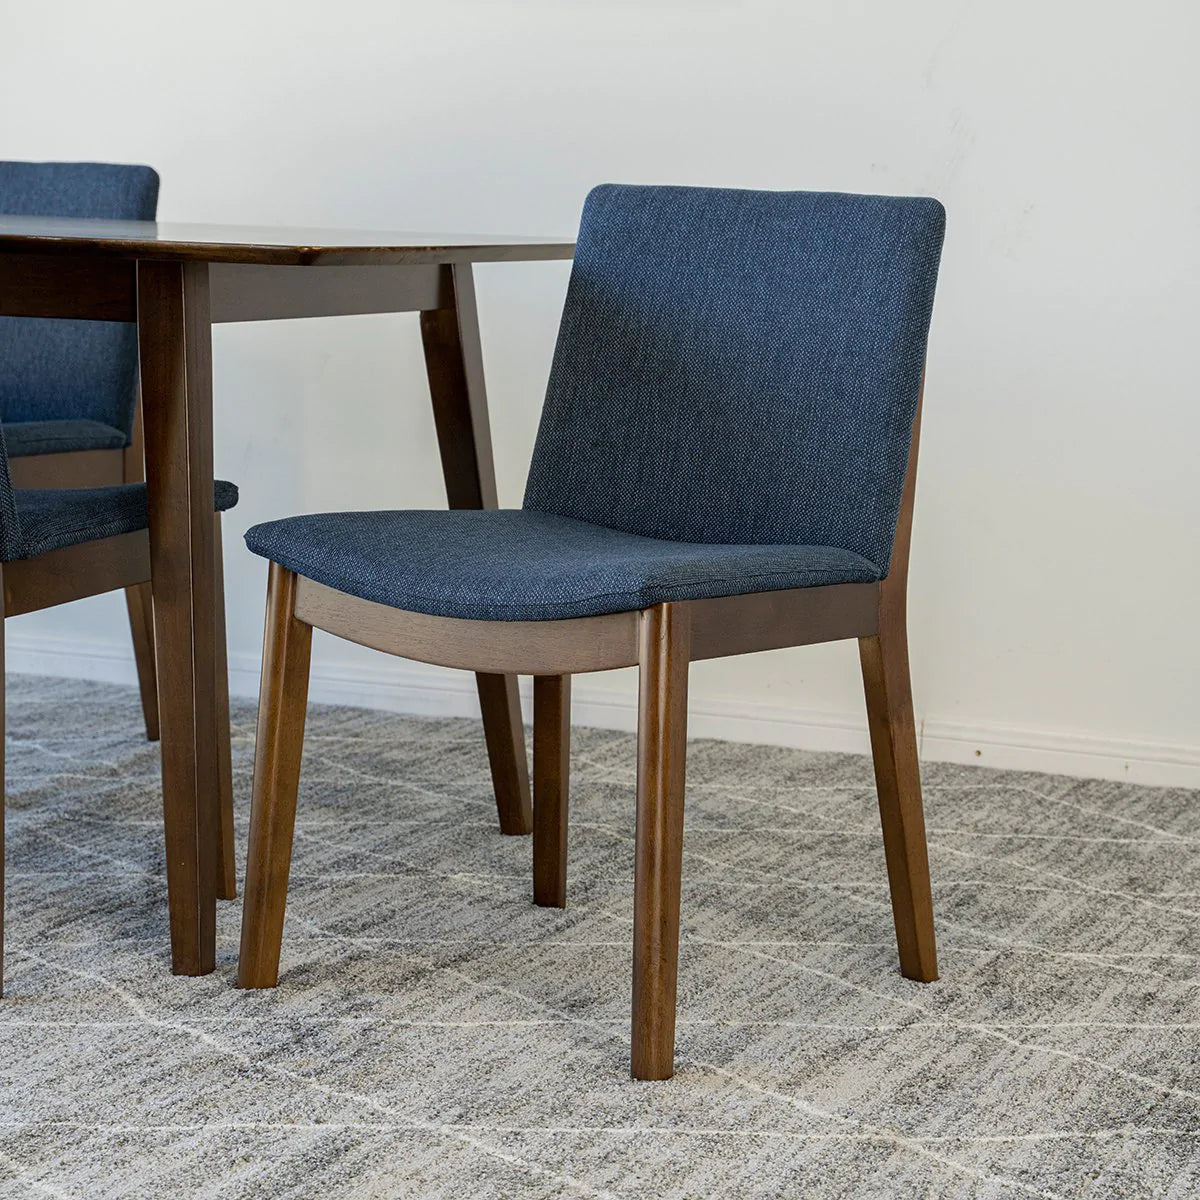 Adira Large Walnut Dining Set with 4 Virginia Blue Dining Chairs